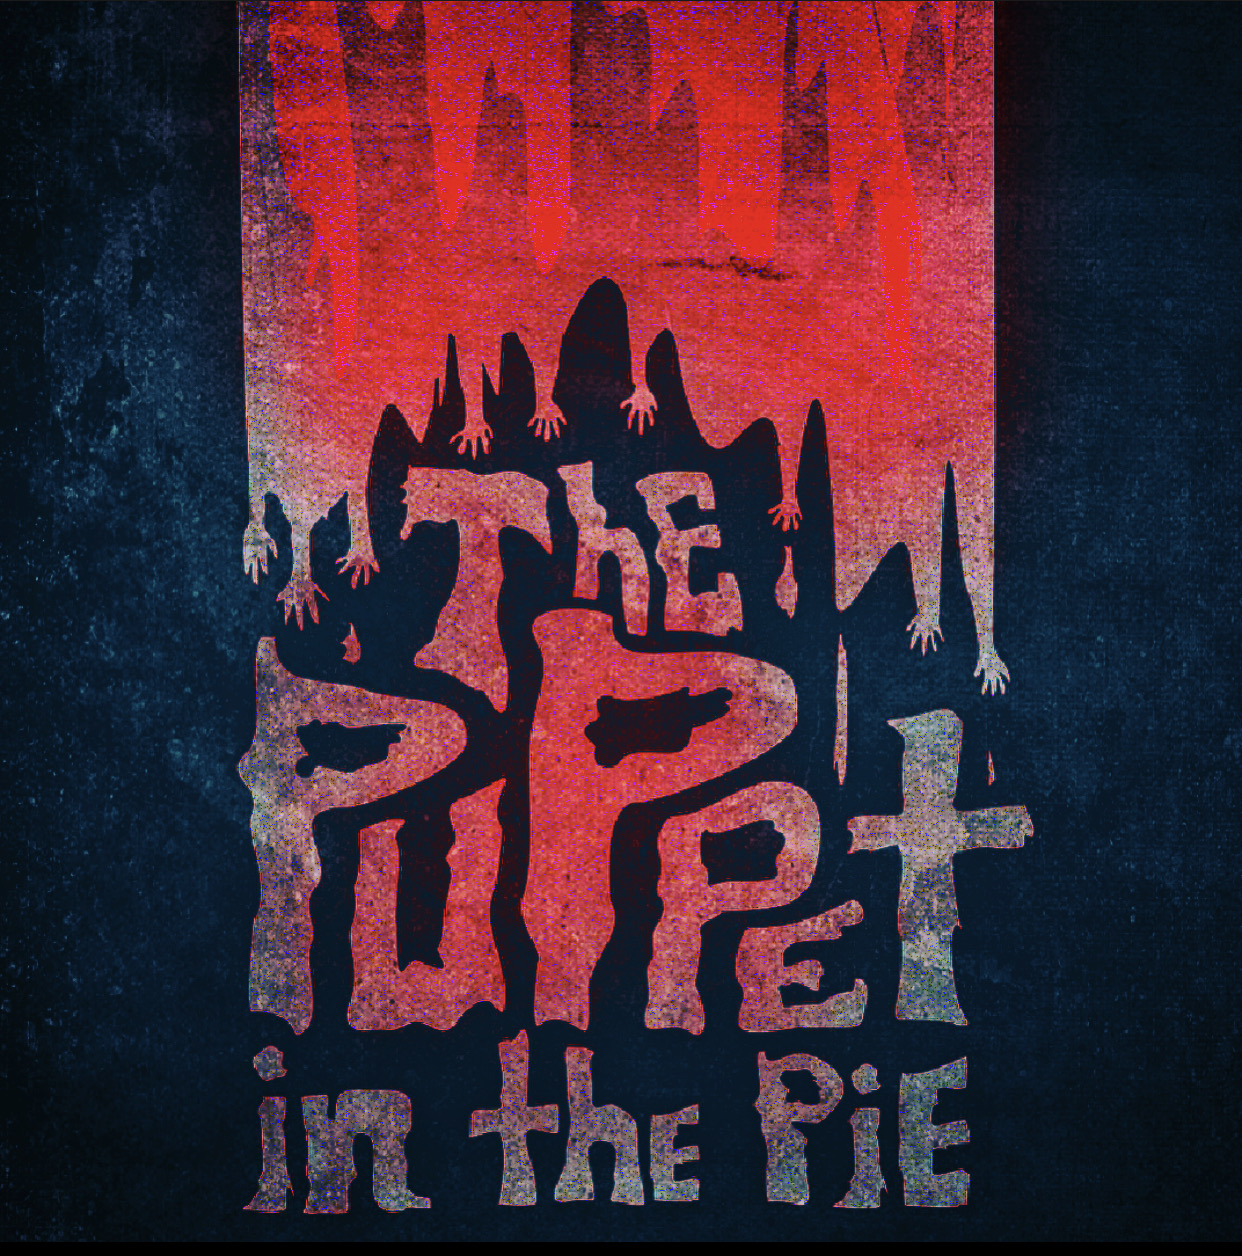 The Puppet in the Pie